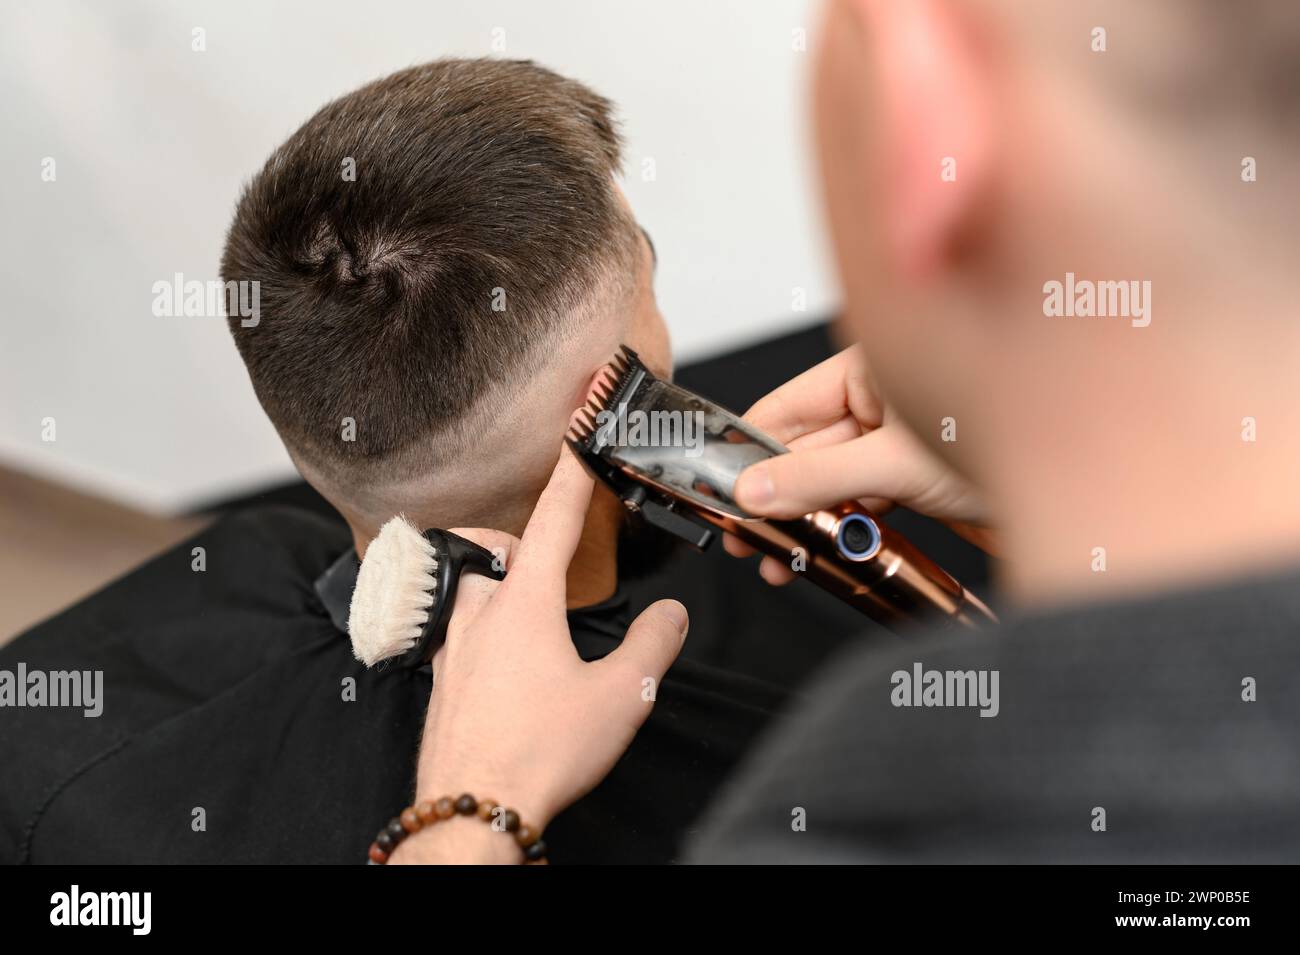 Haircut and alignment of the head contour with a hair clipper and trimmer. Short haircut in the barbershop. Stock Photo